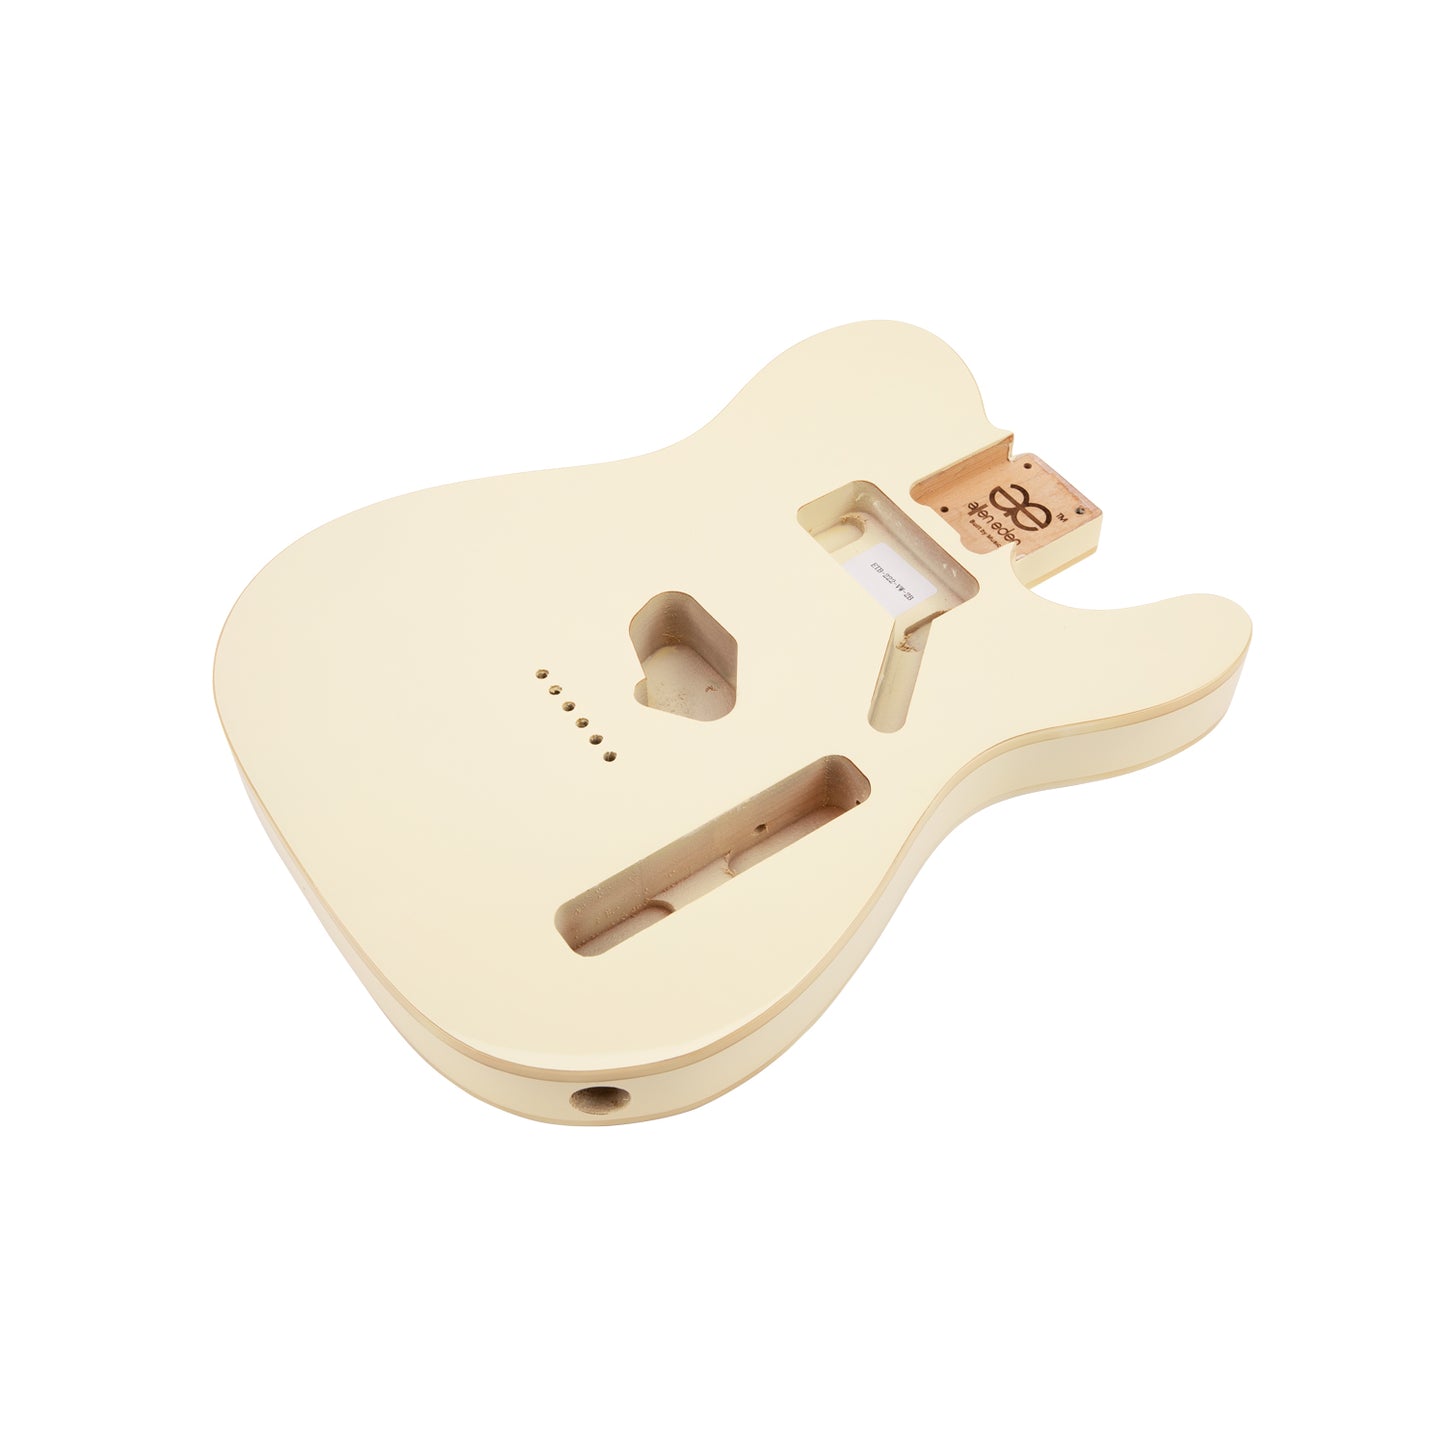 AE Guitars® T-Style Alder Replacement Guitar Body Vintage White with Binding